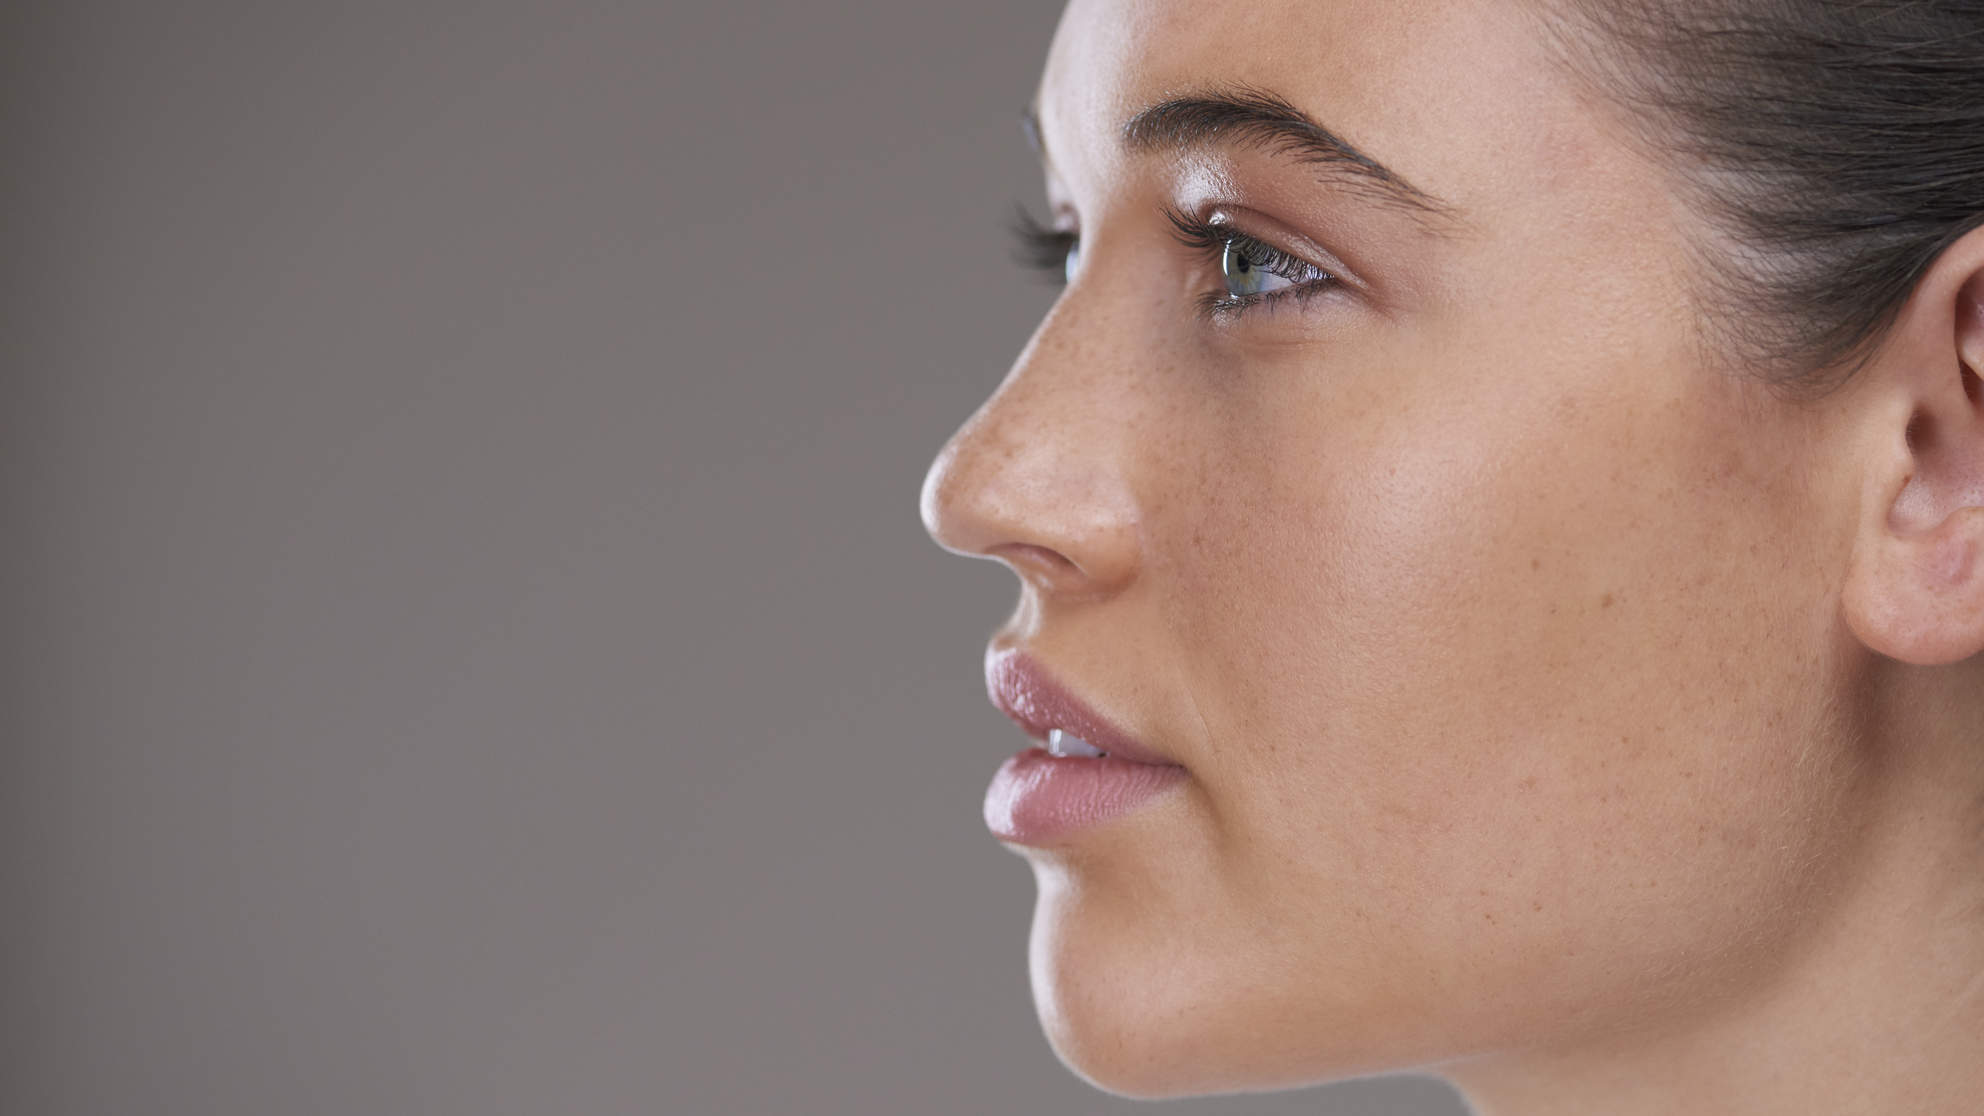 Women All Over the Internet Are Sharing Photos of Their Noses—Here's ...